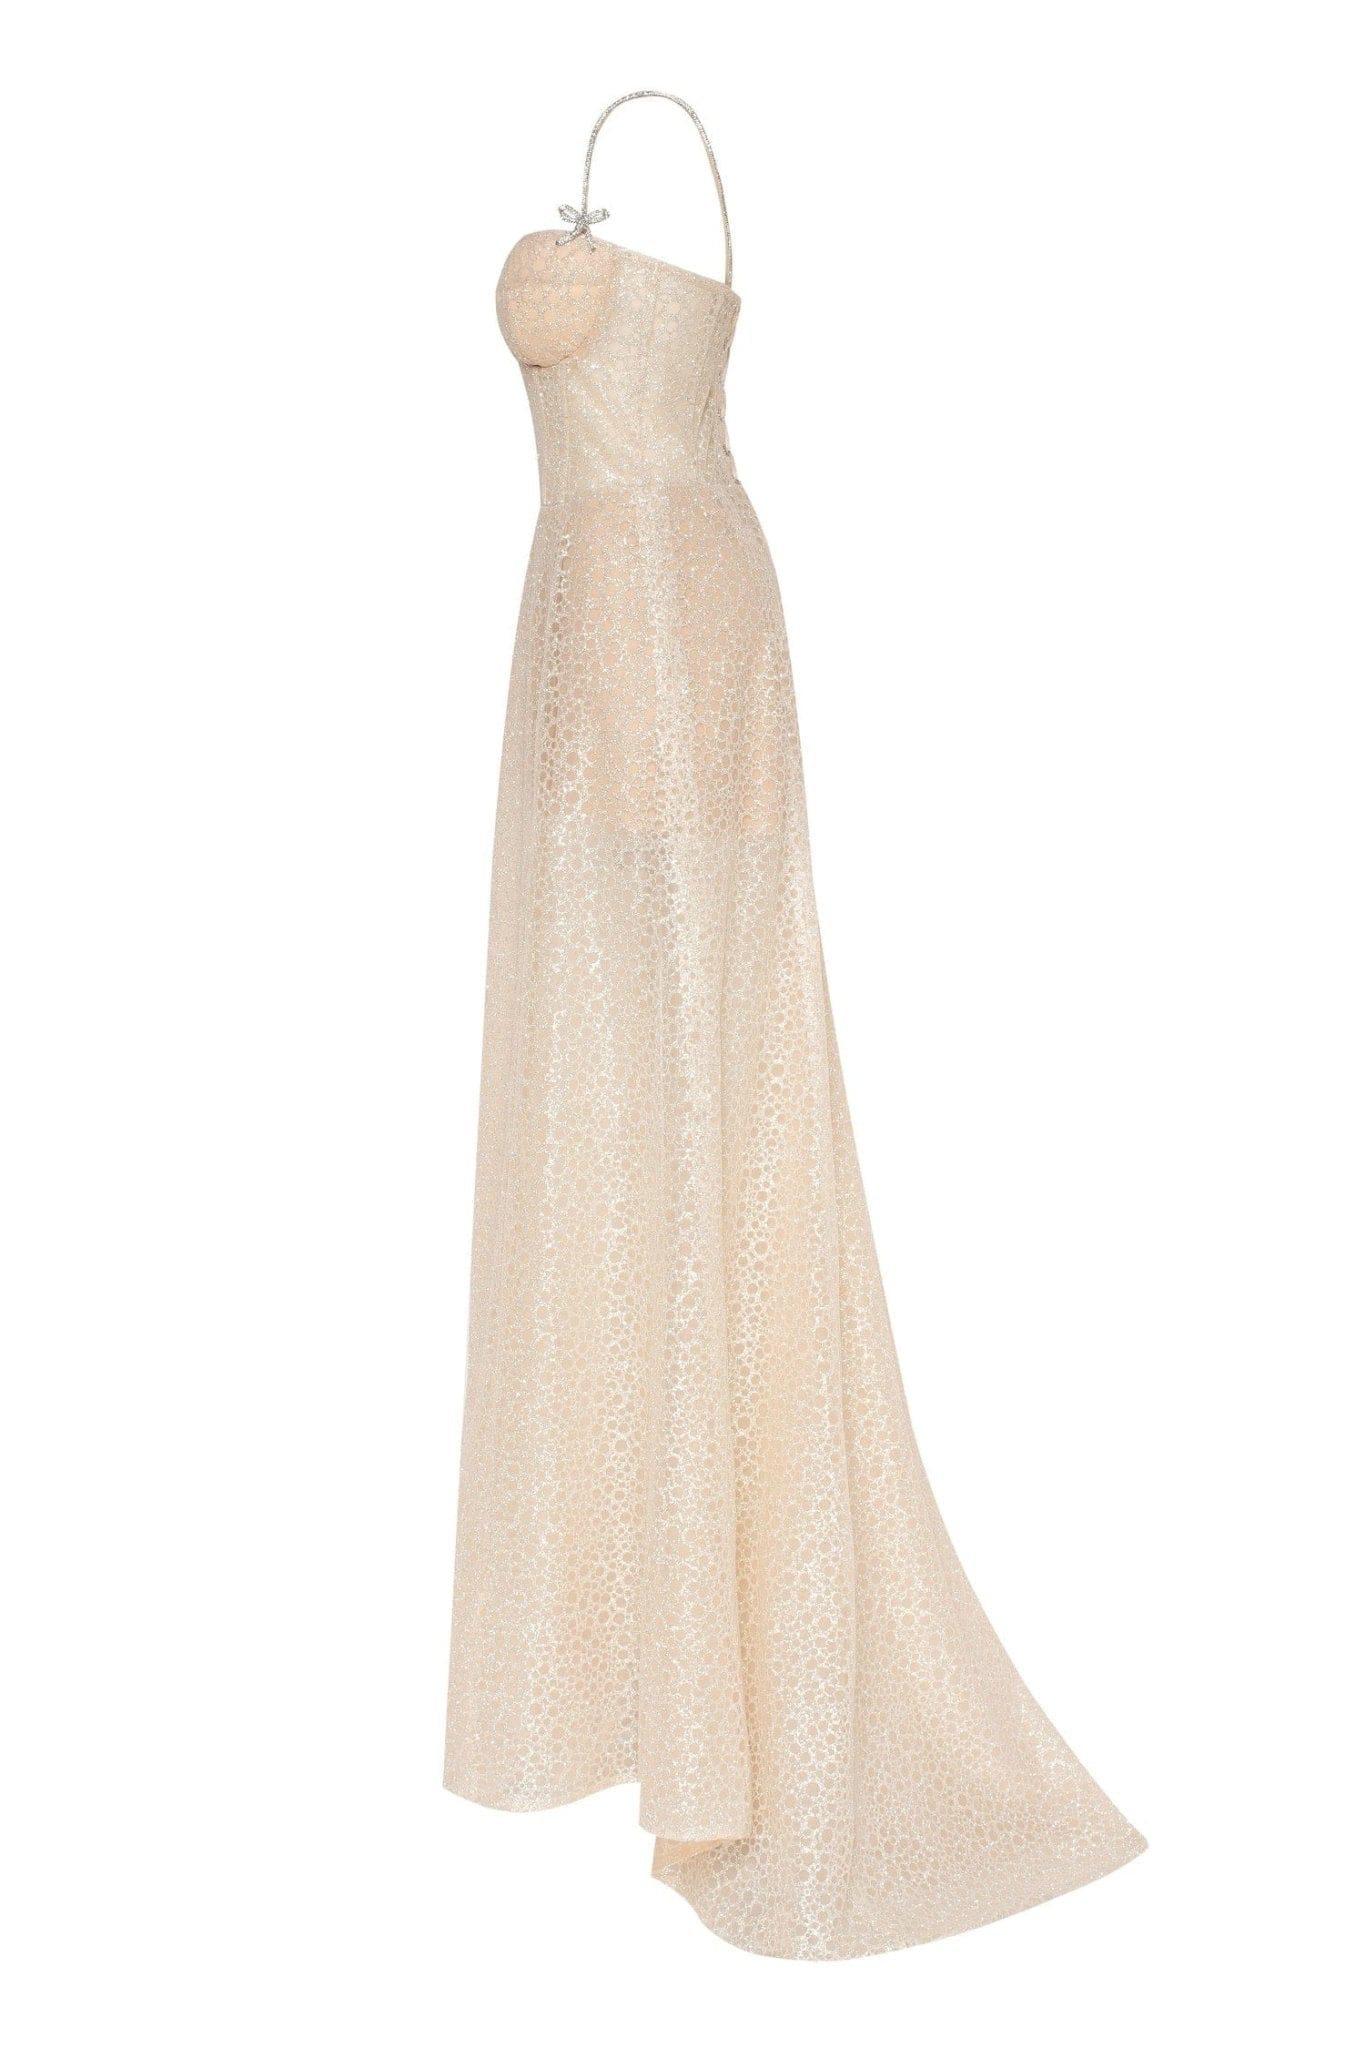 Golden Royal fitted evening gown with the high slit - Milla